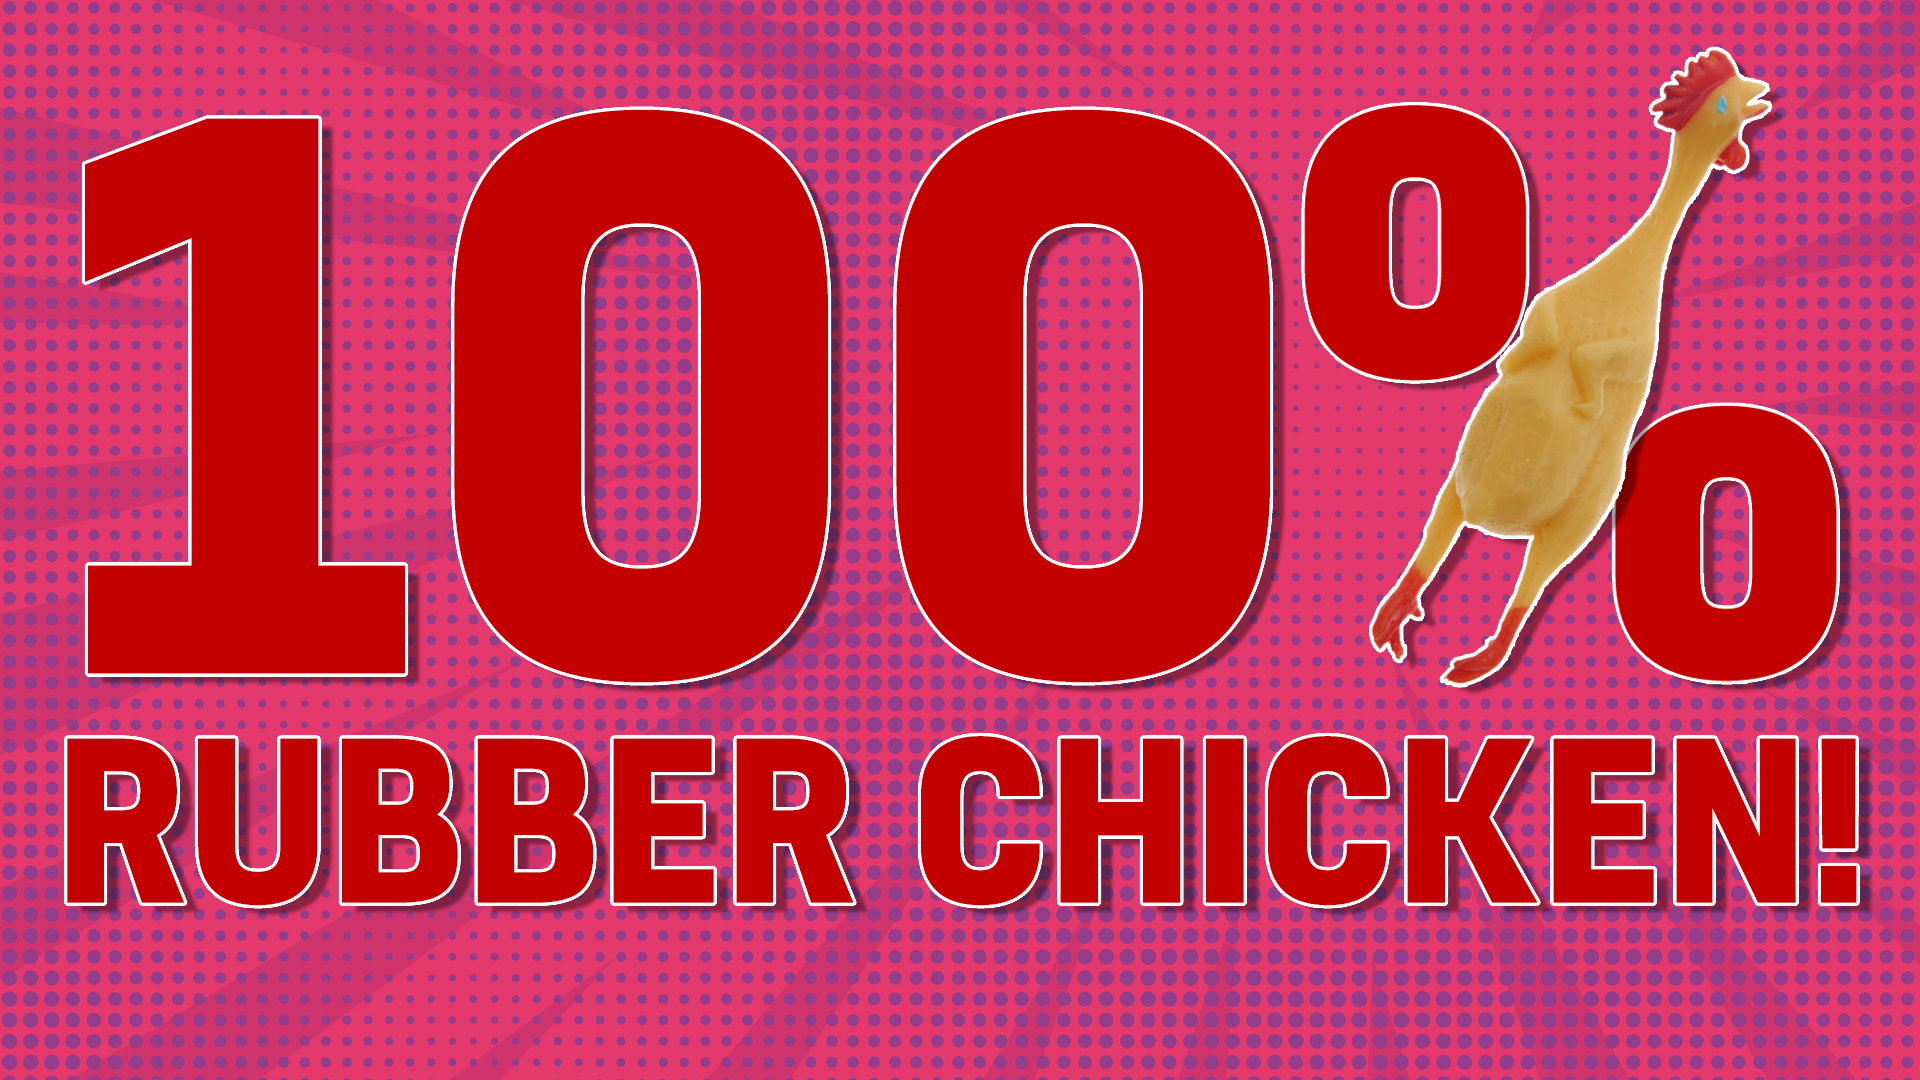 You are: 100% RUBBER CHICKEN!